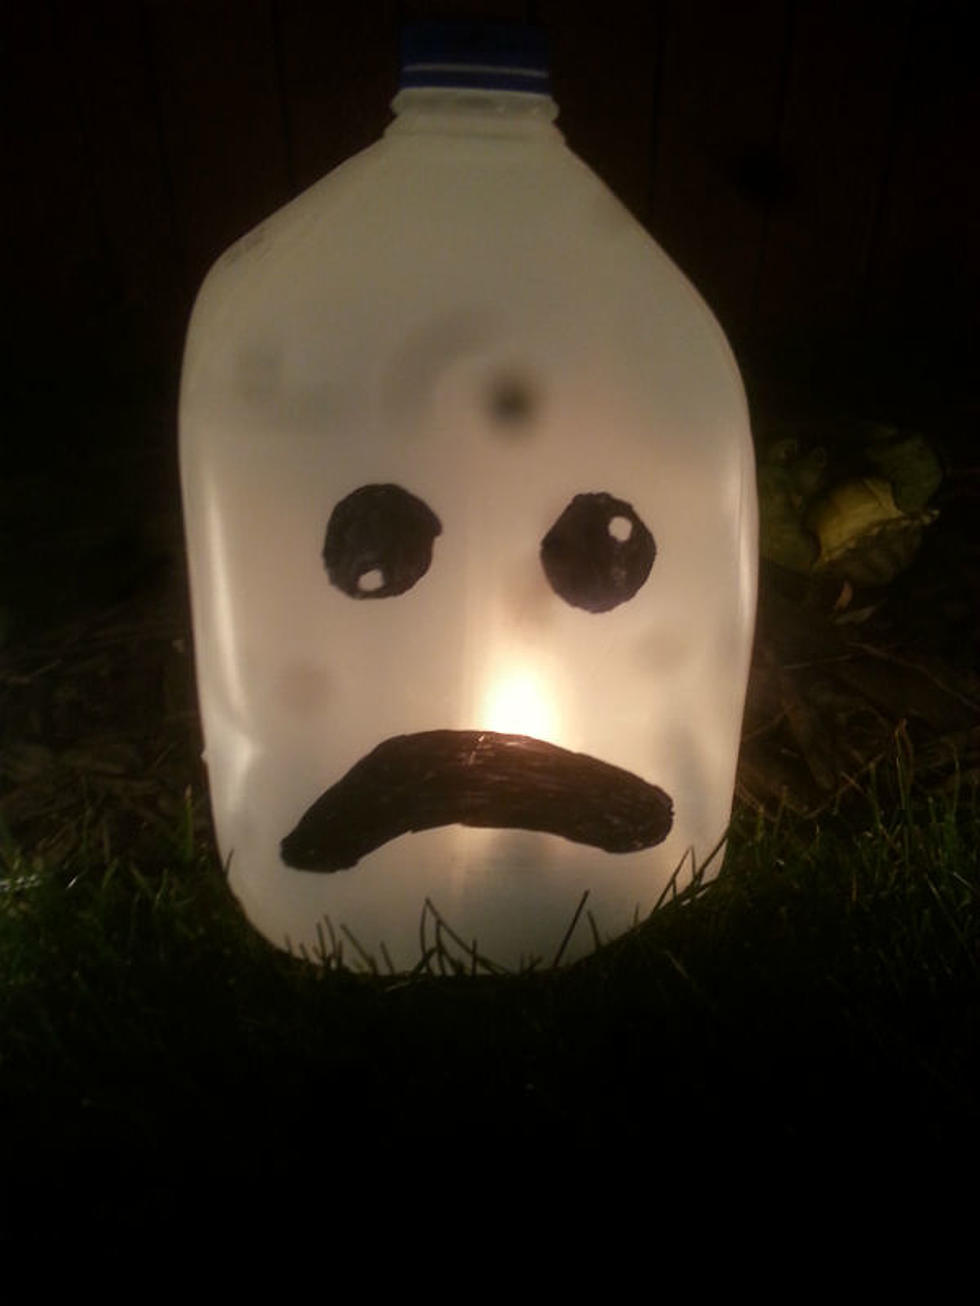 Milk Jug Ghosts Light Up Your Yard for Halloween – Simple to Make! [PHOTOS]